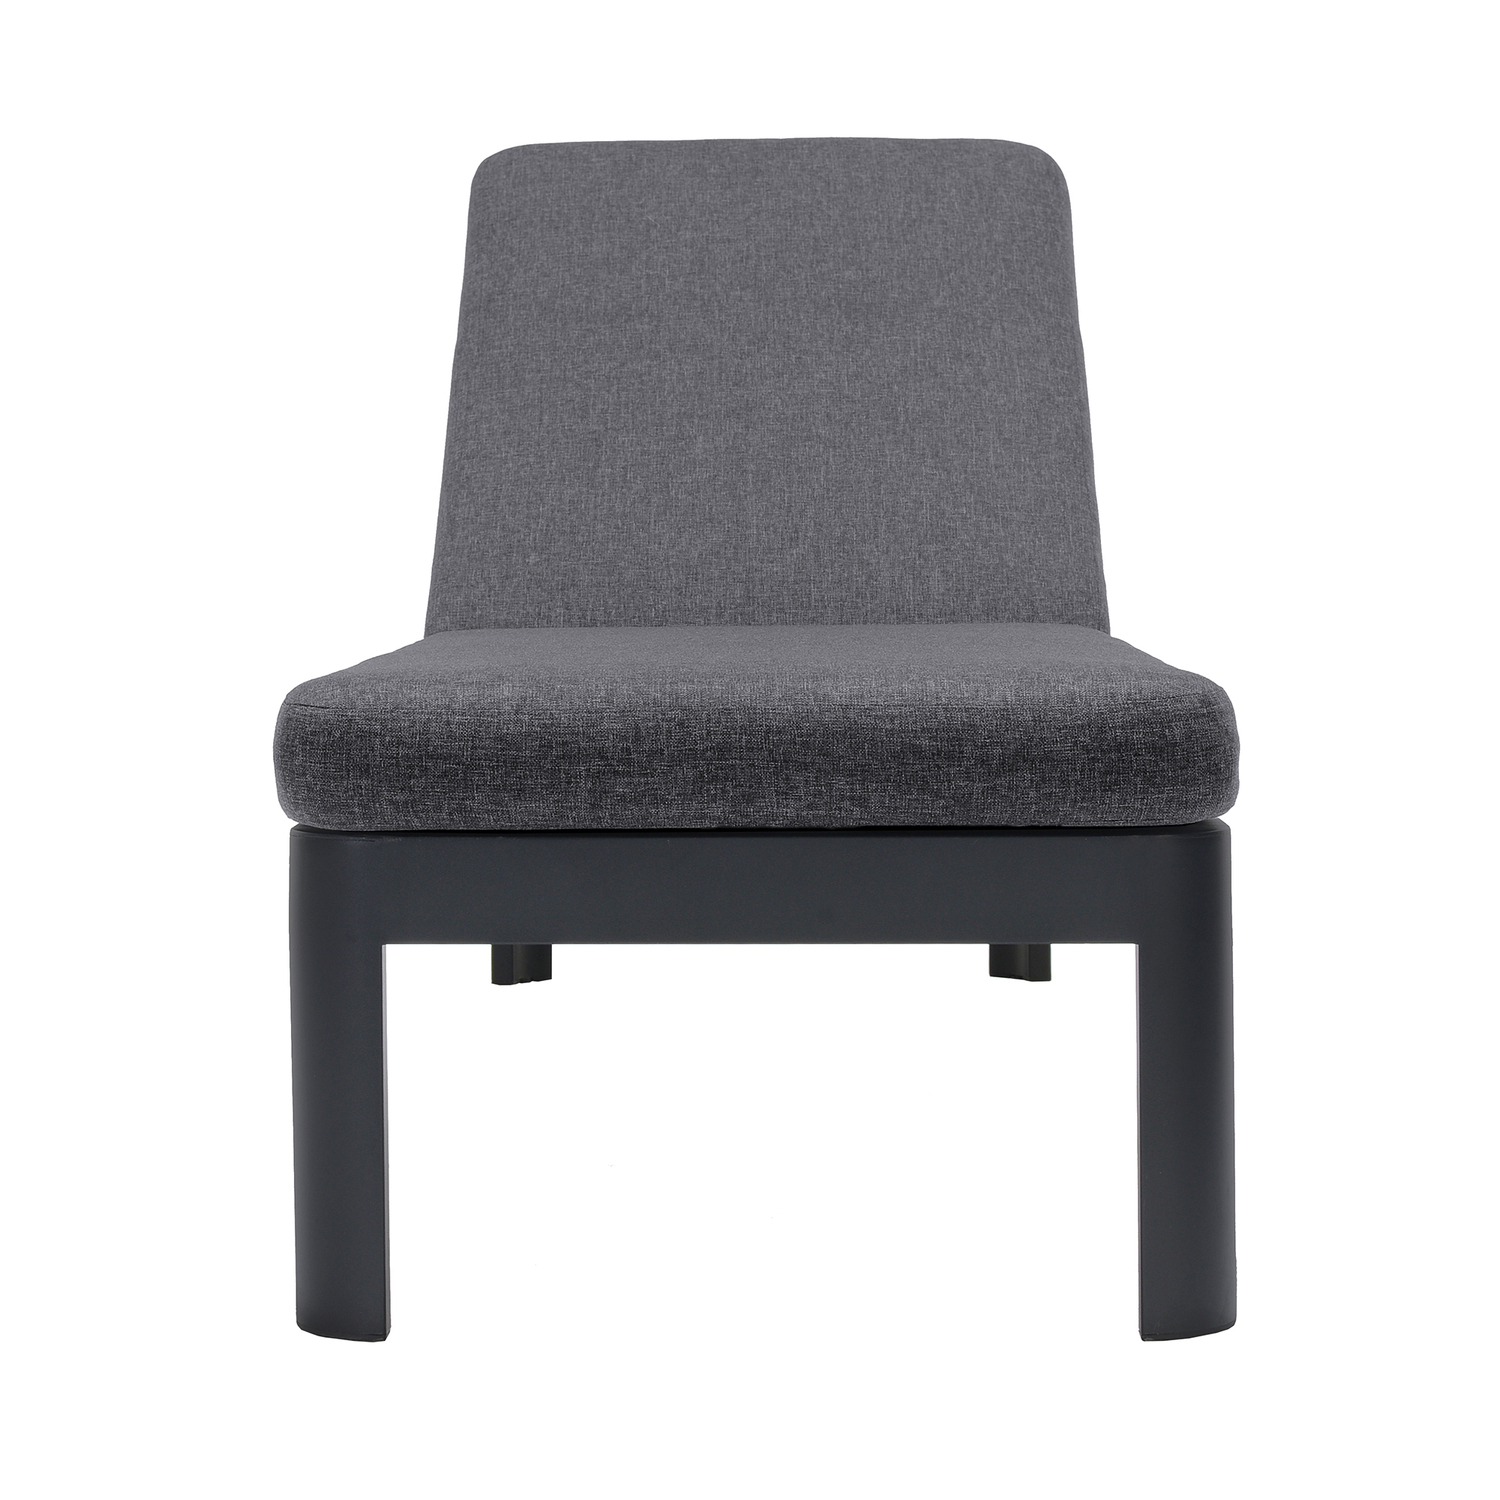 Portals Outdoor Chaise Lounge Chair in Black Finish and Grey Cushions - image 2 of 5